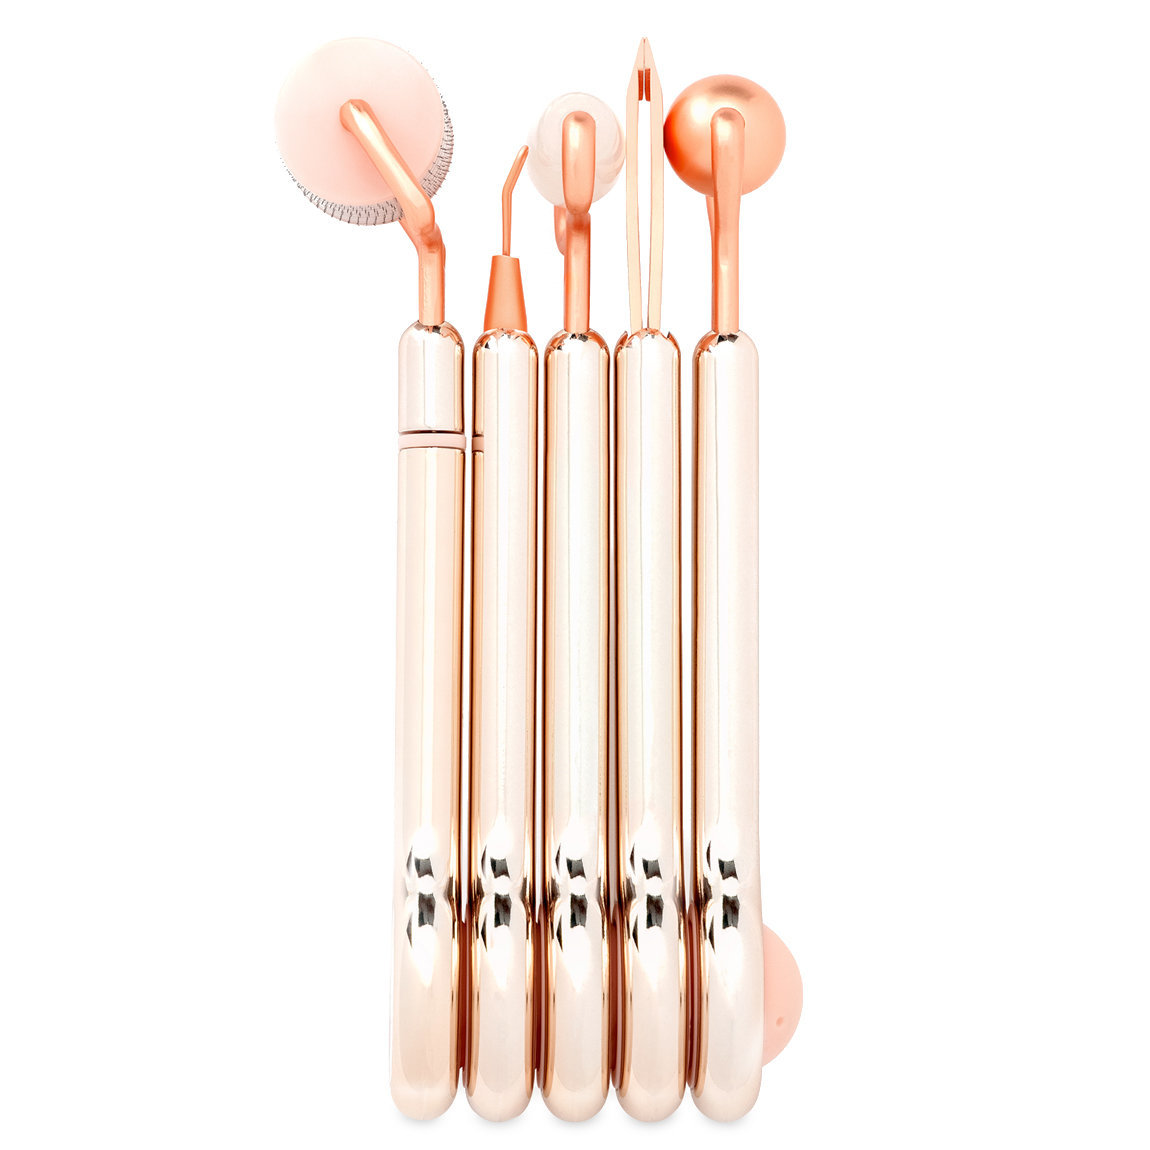 Nudestix Nudestix x Beauty Magnet 5-in-1 Rose Gold Professional Skin Tool alternative view 1 - product swatch.